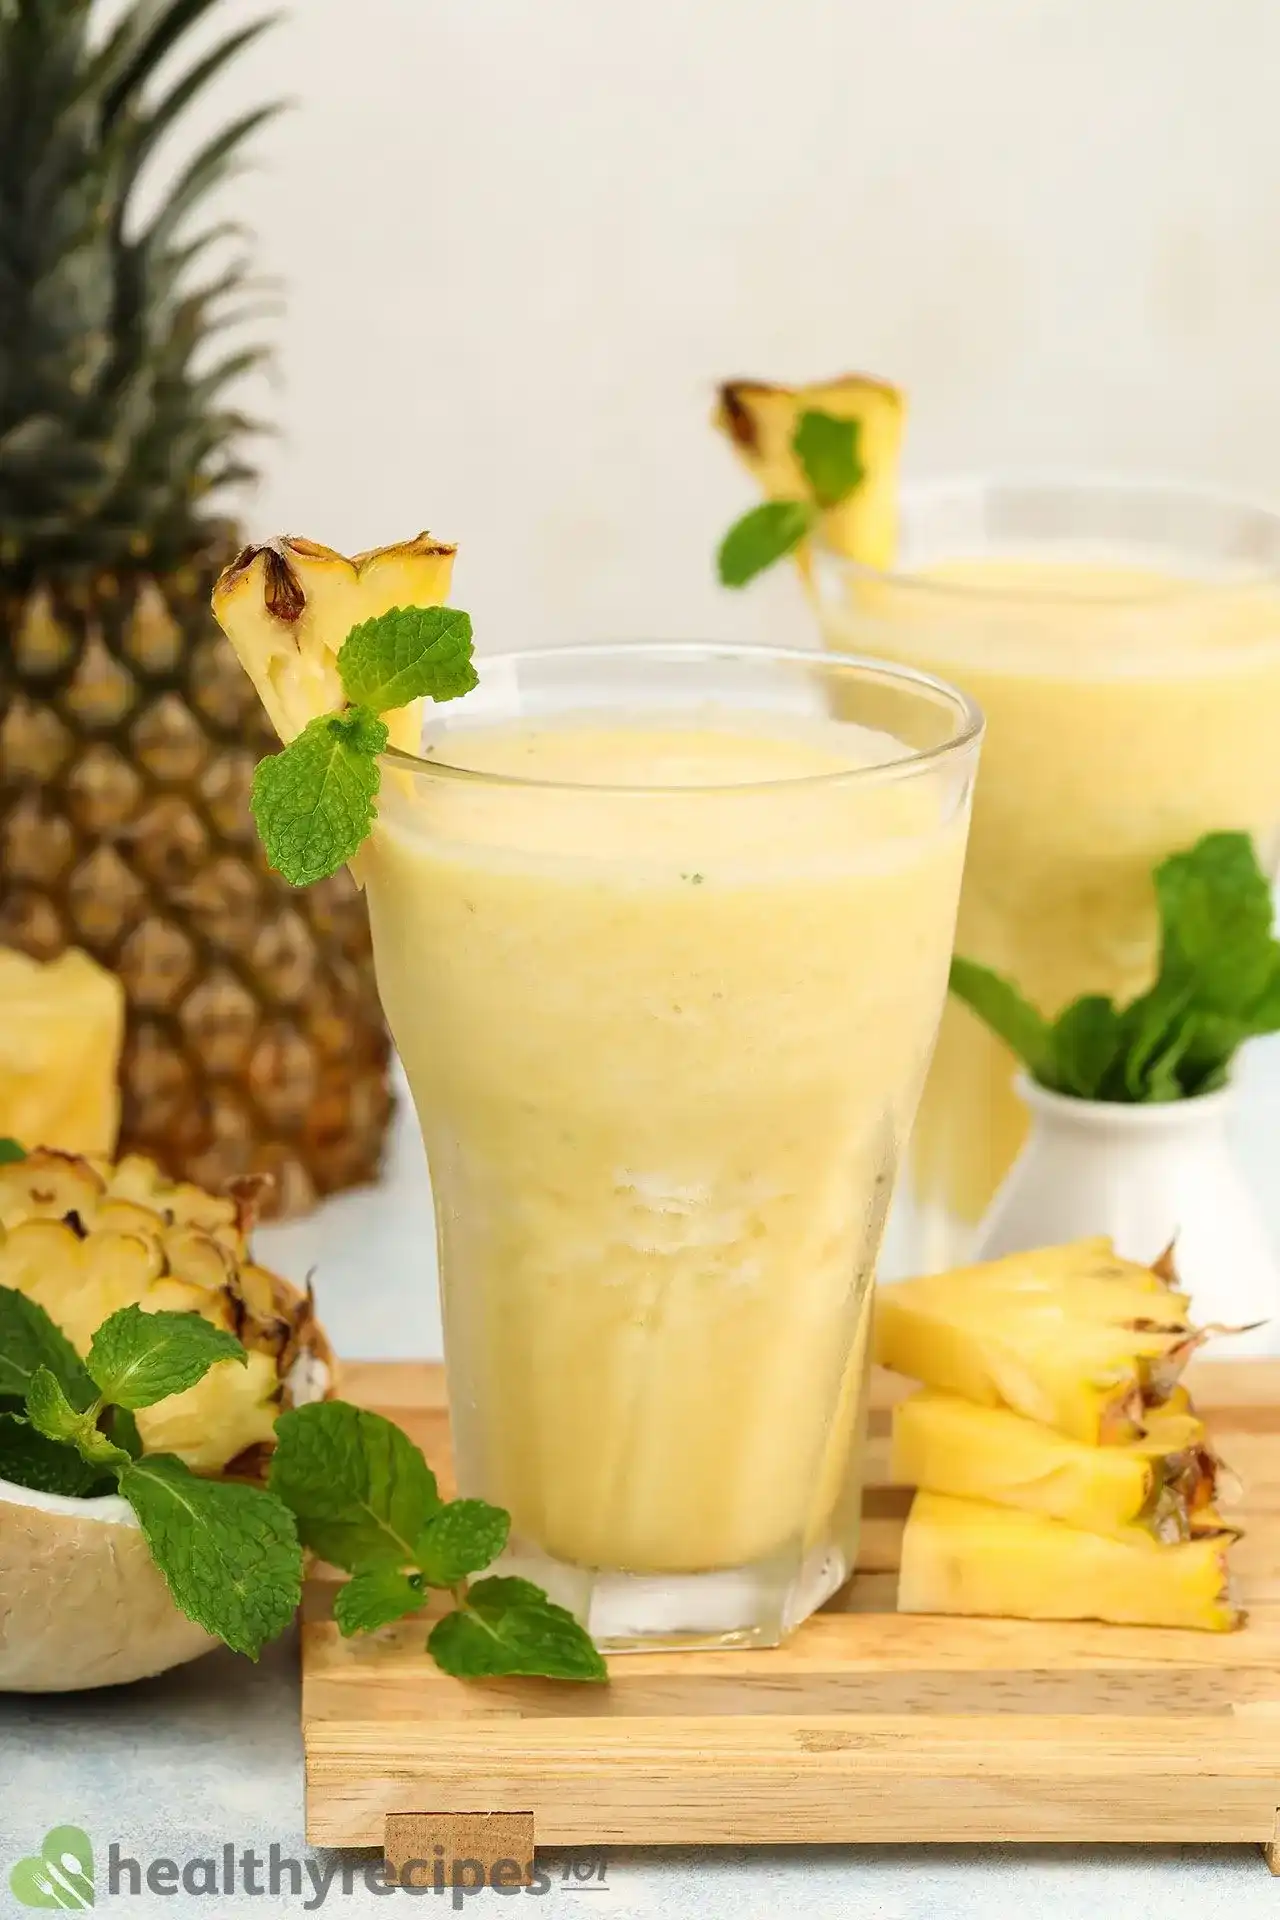 Pineapple Coconut Smoothie Recipe: A Sweet, Rich Smoothie for Summer